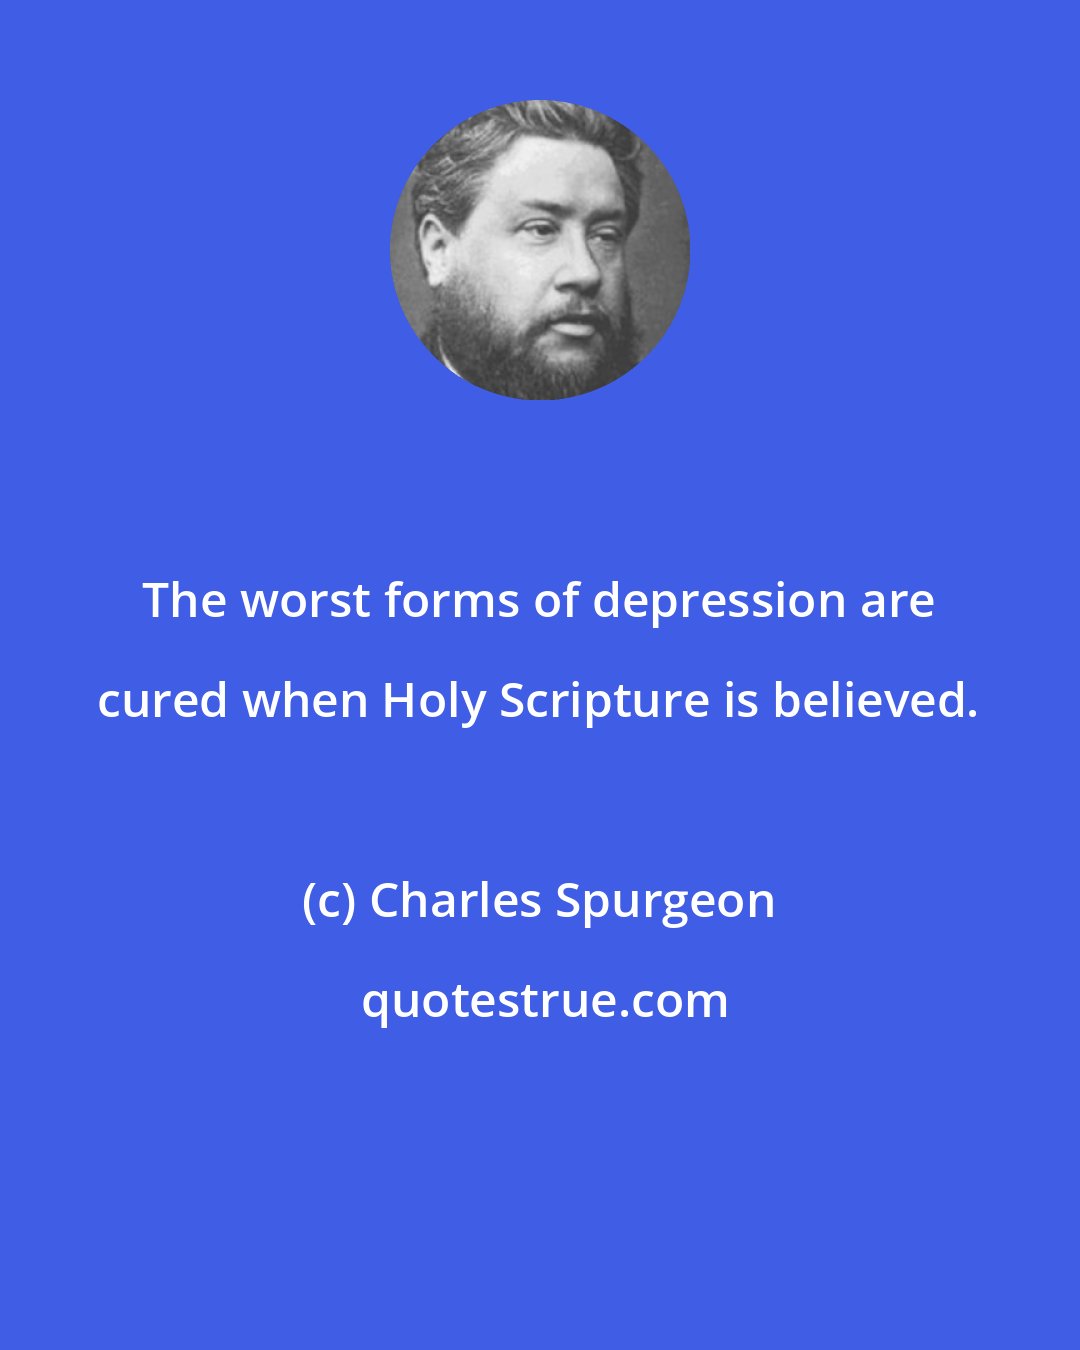 Charles Spurgeon: The worst forms of depression are cured when Holy Scripture is believed.